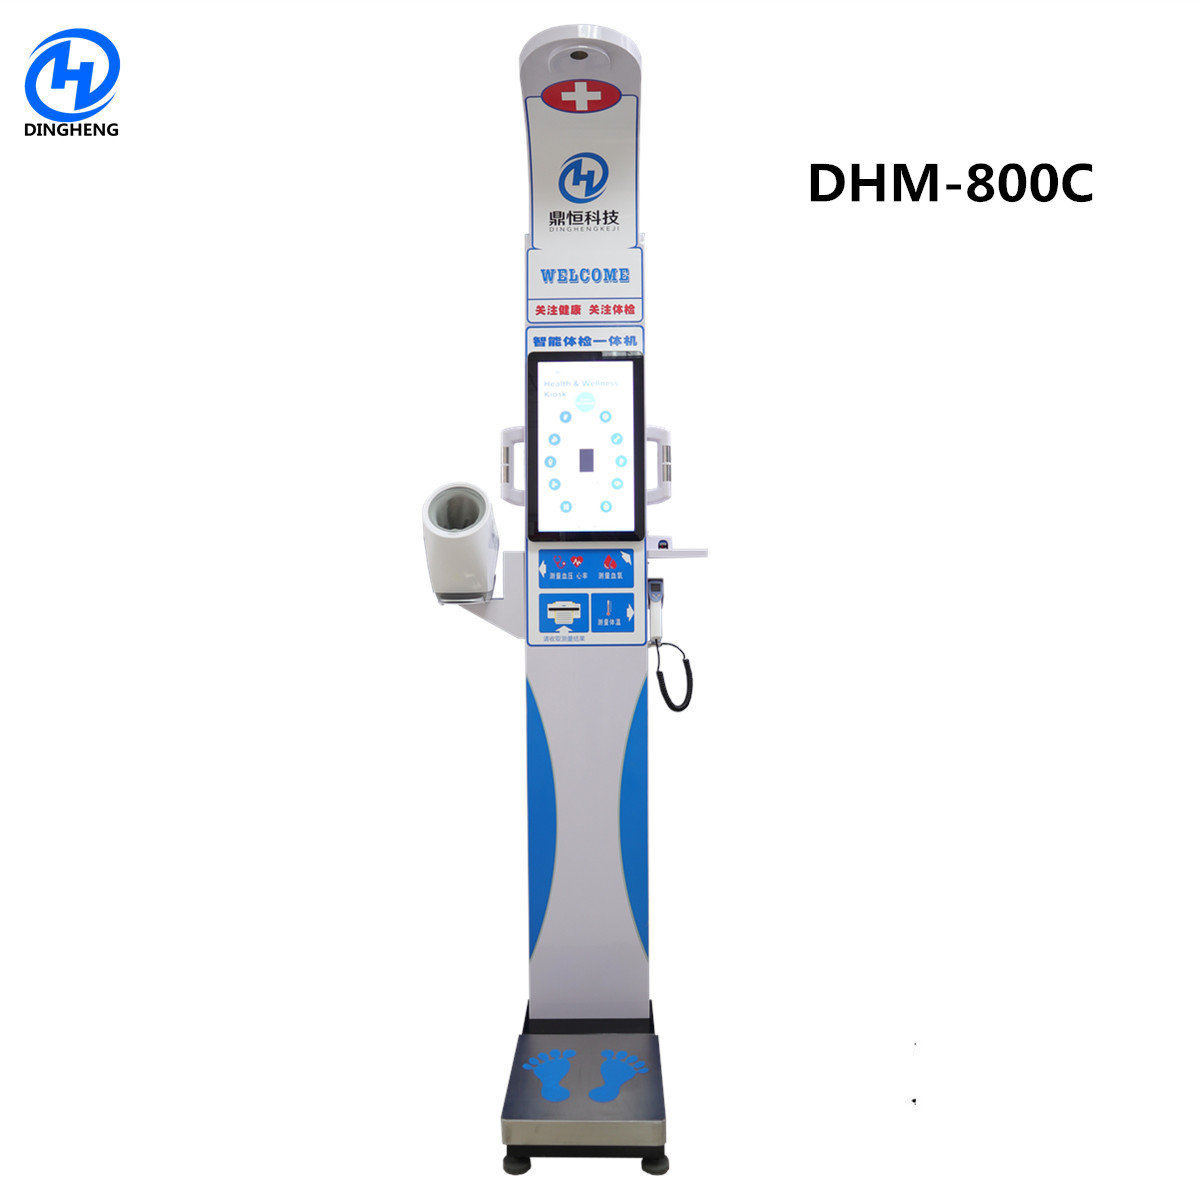 China DHM-800c ultrasonic probe for height measurement adjust the height of blood pressure monitor health checkup station wholesale